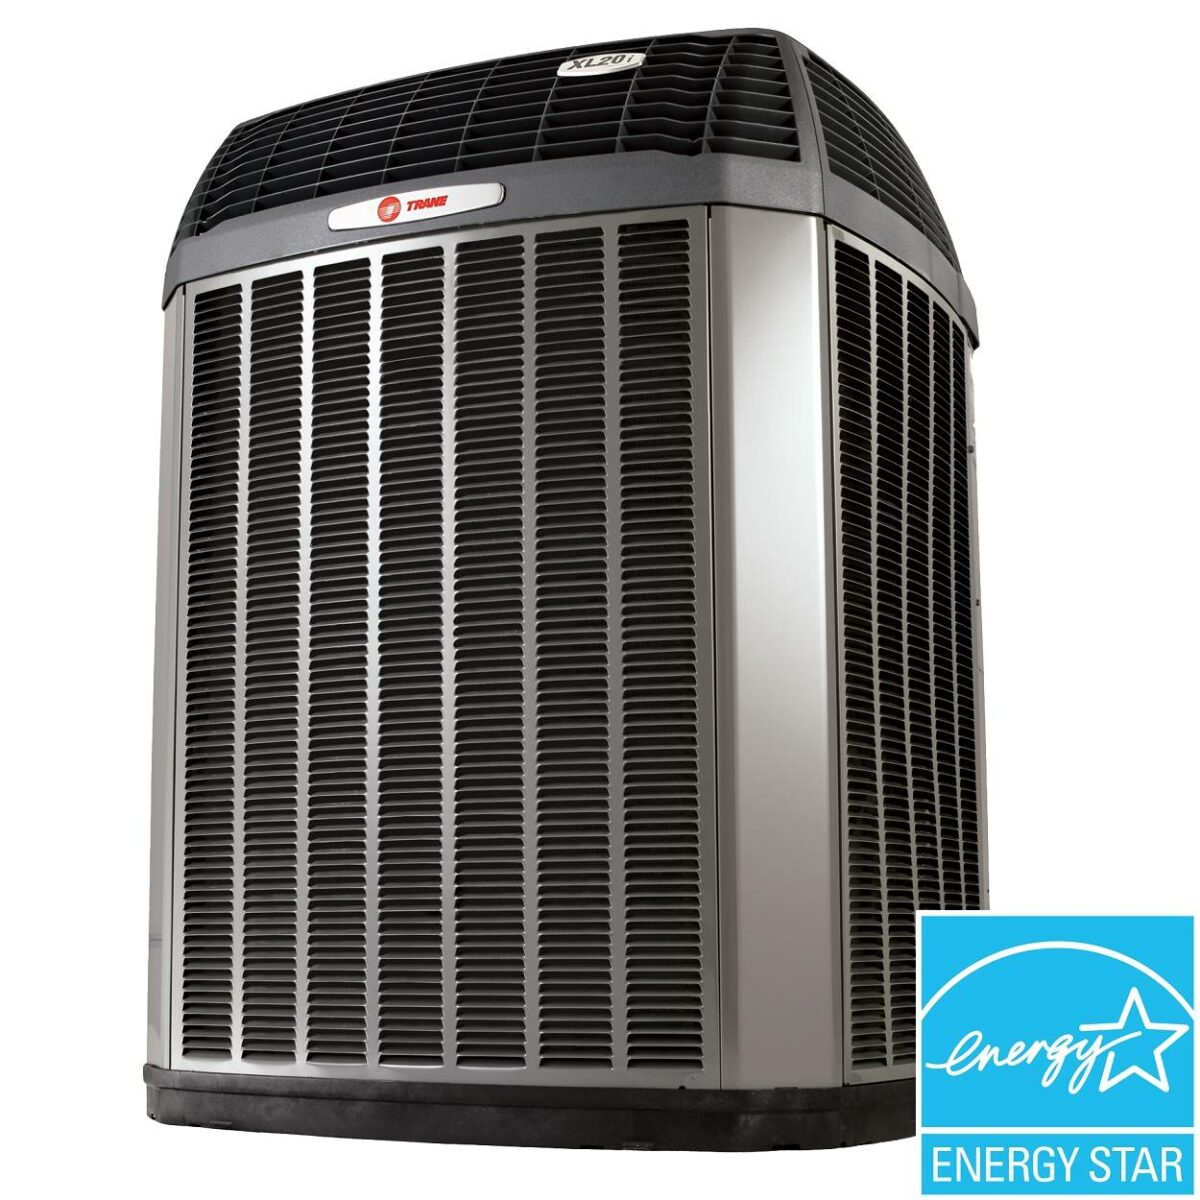 Trane Air Conditioners Prices Fully Installed from 4,200